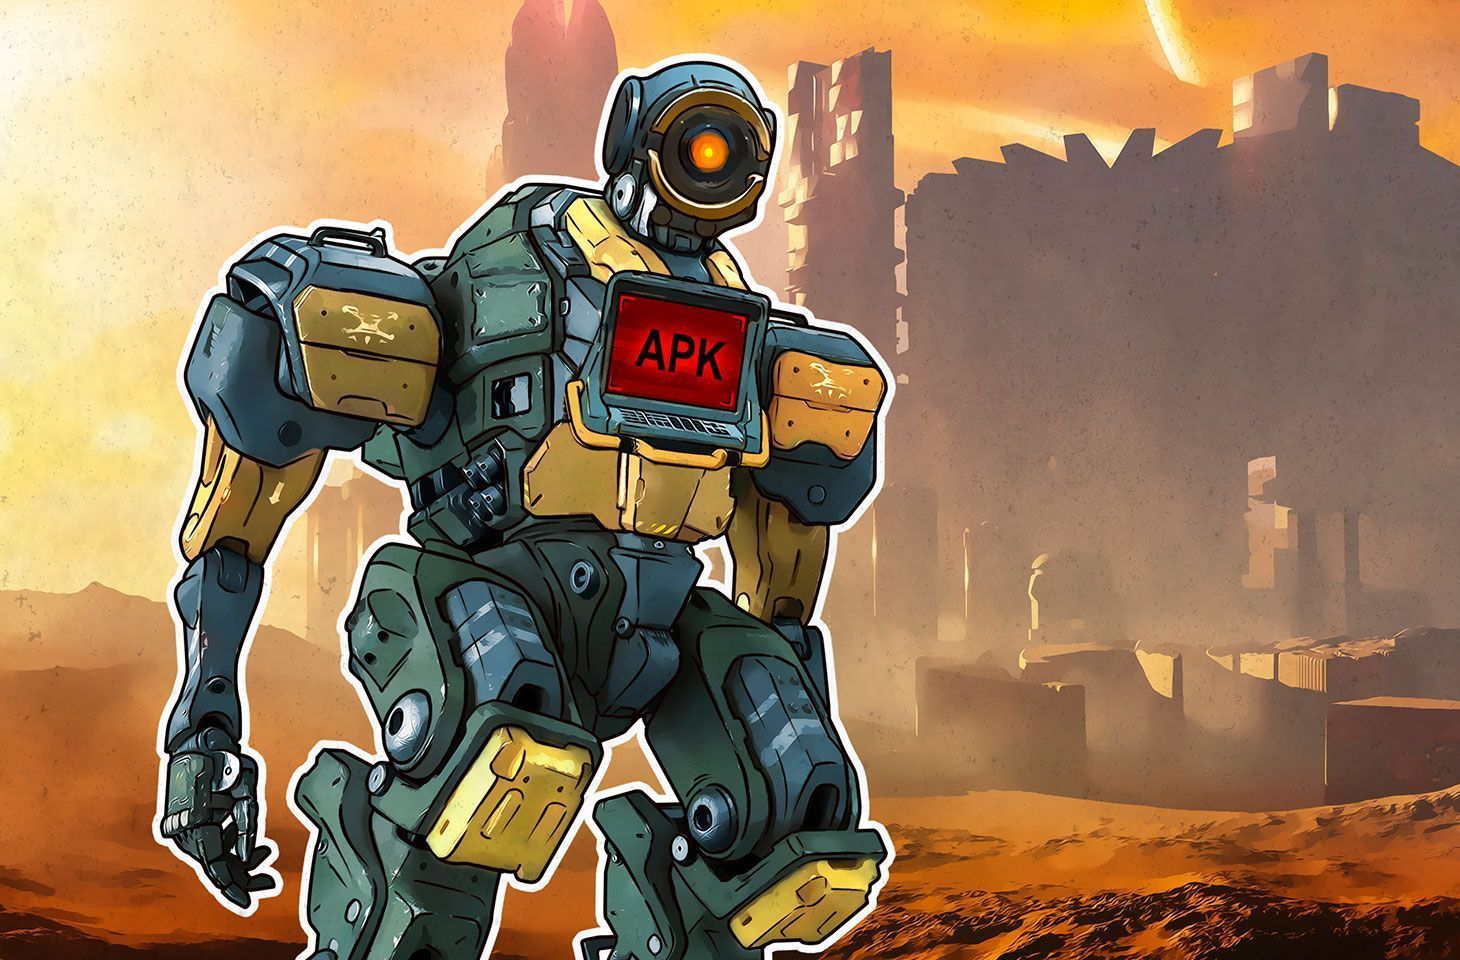 Gamers download Apex Legends for Android but get a Trojan instead